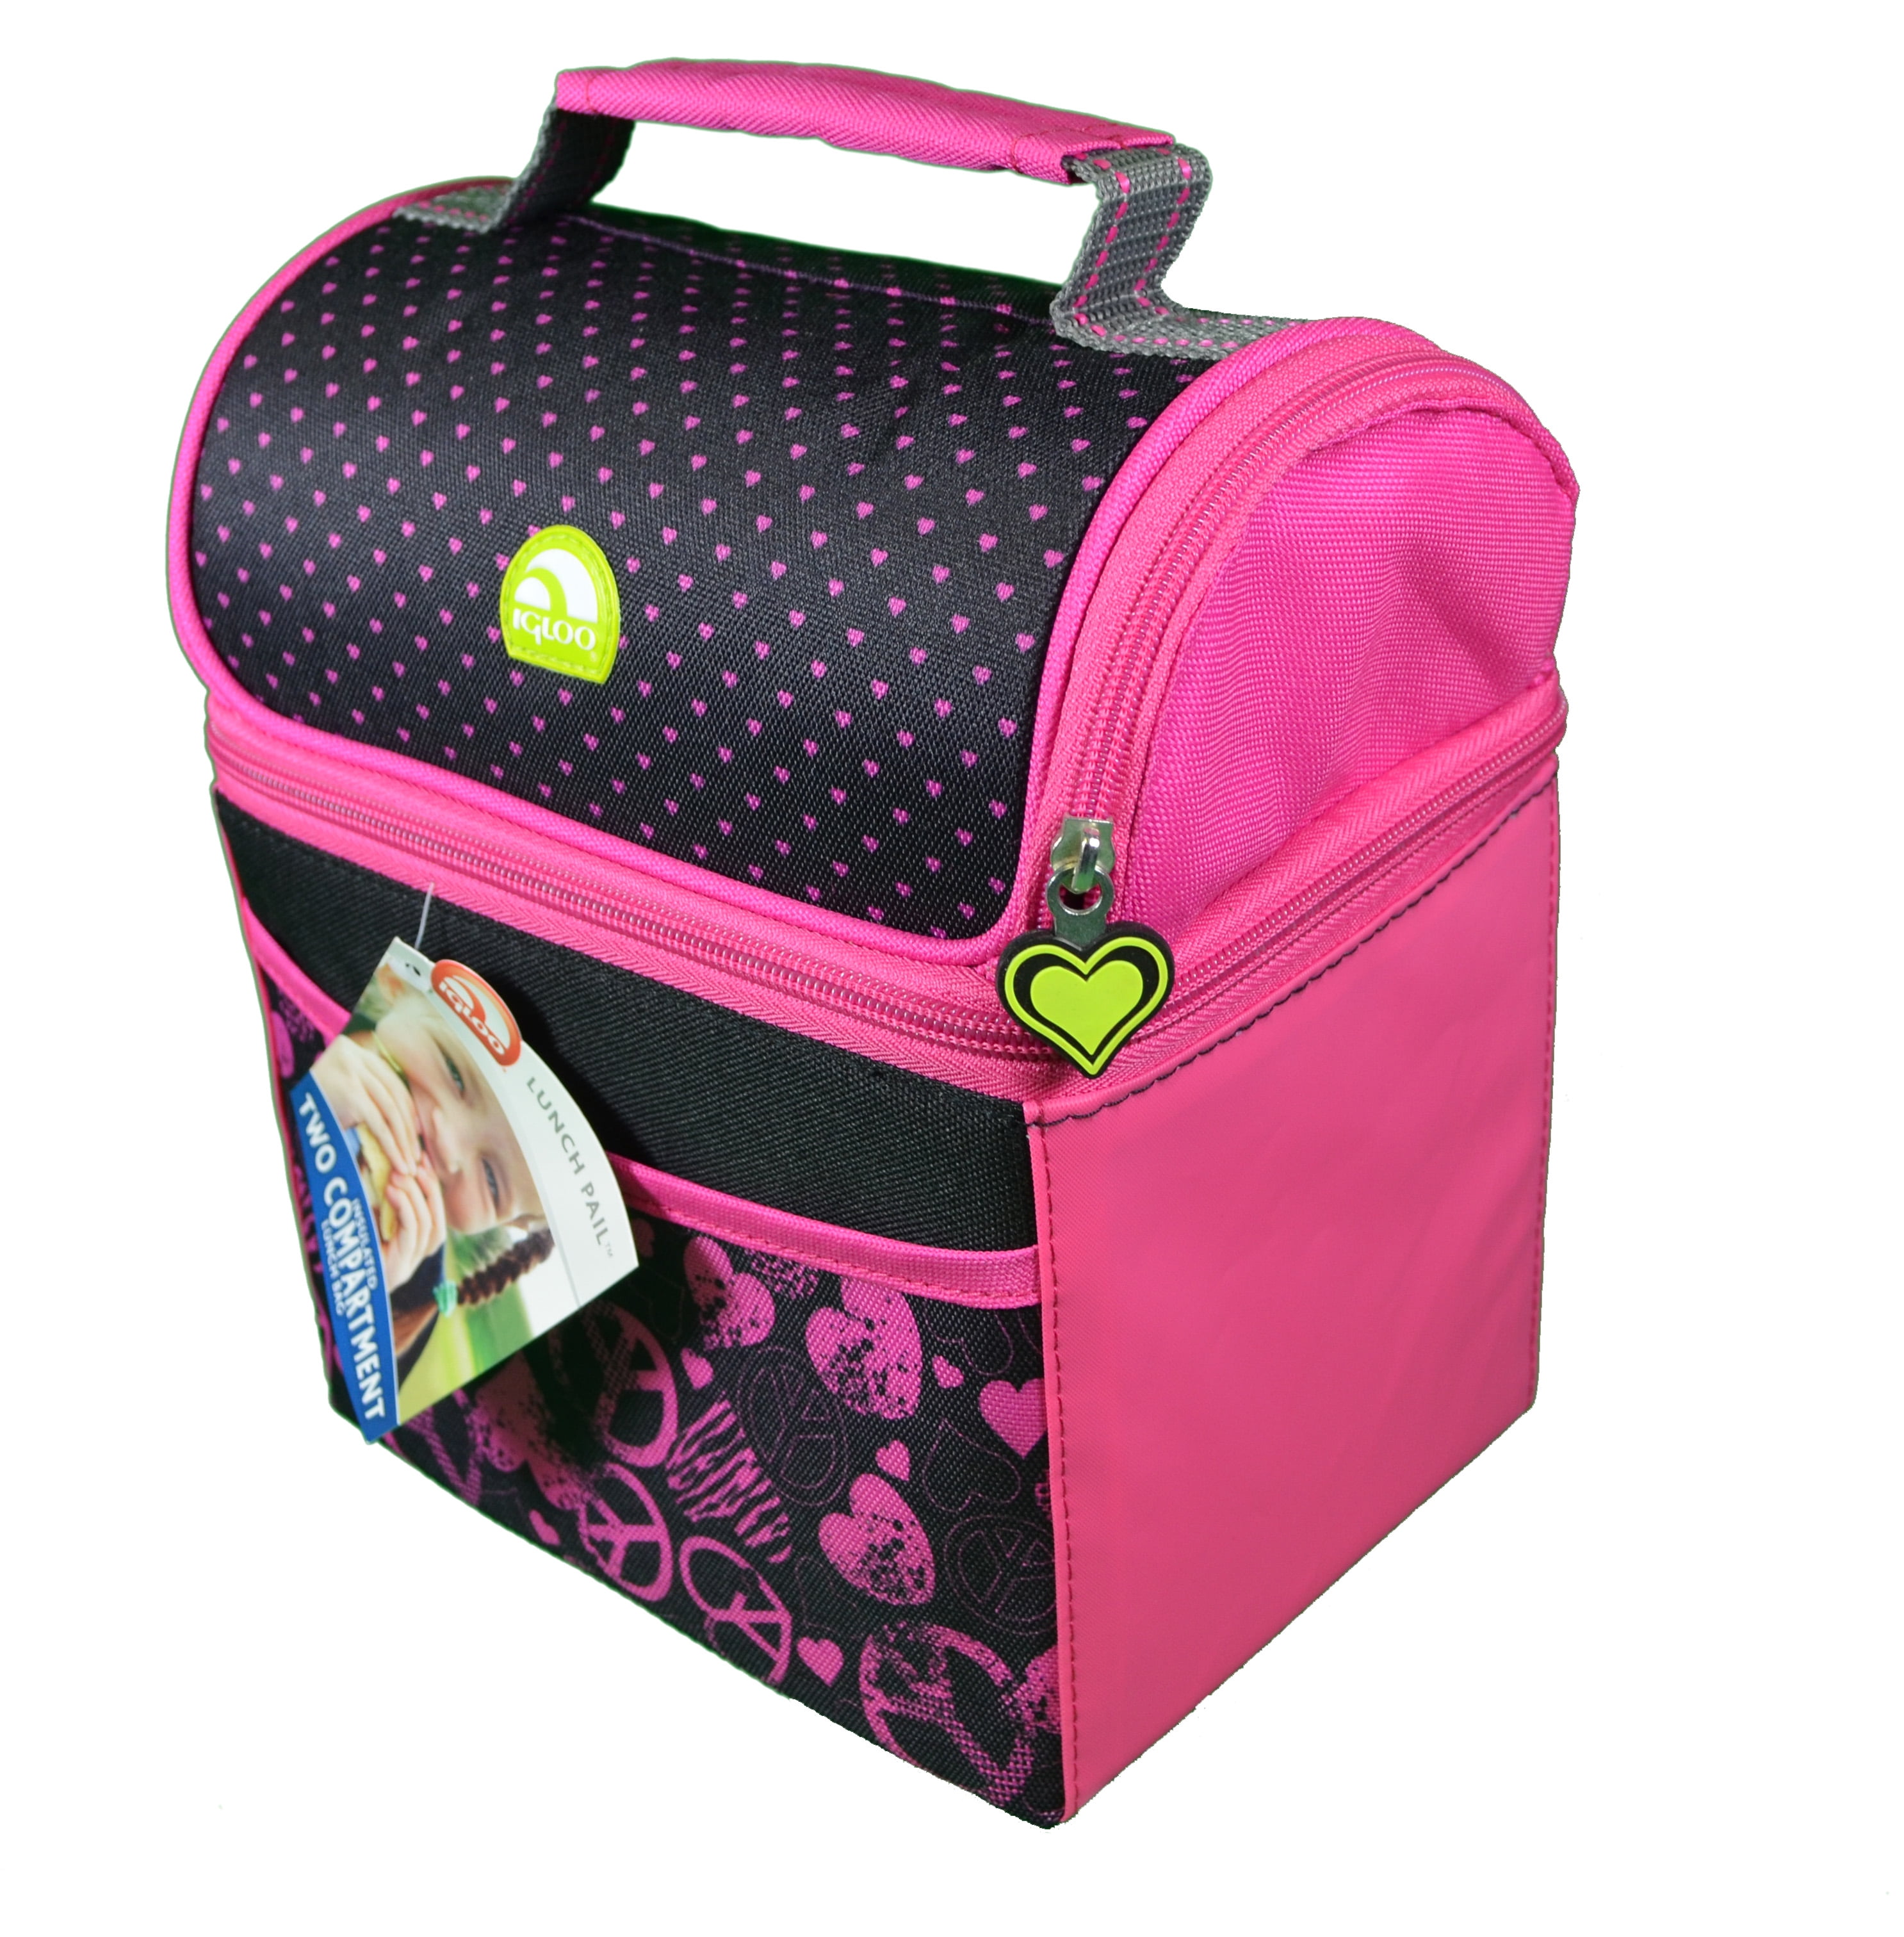 Igloo Tropical Palms Blue & Pink Insulated 20-Can Capacity Cooler Bag –  Aura In Pink Inc.